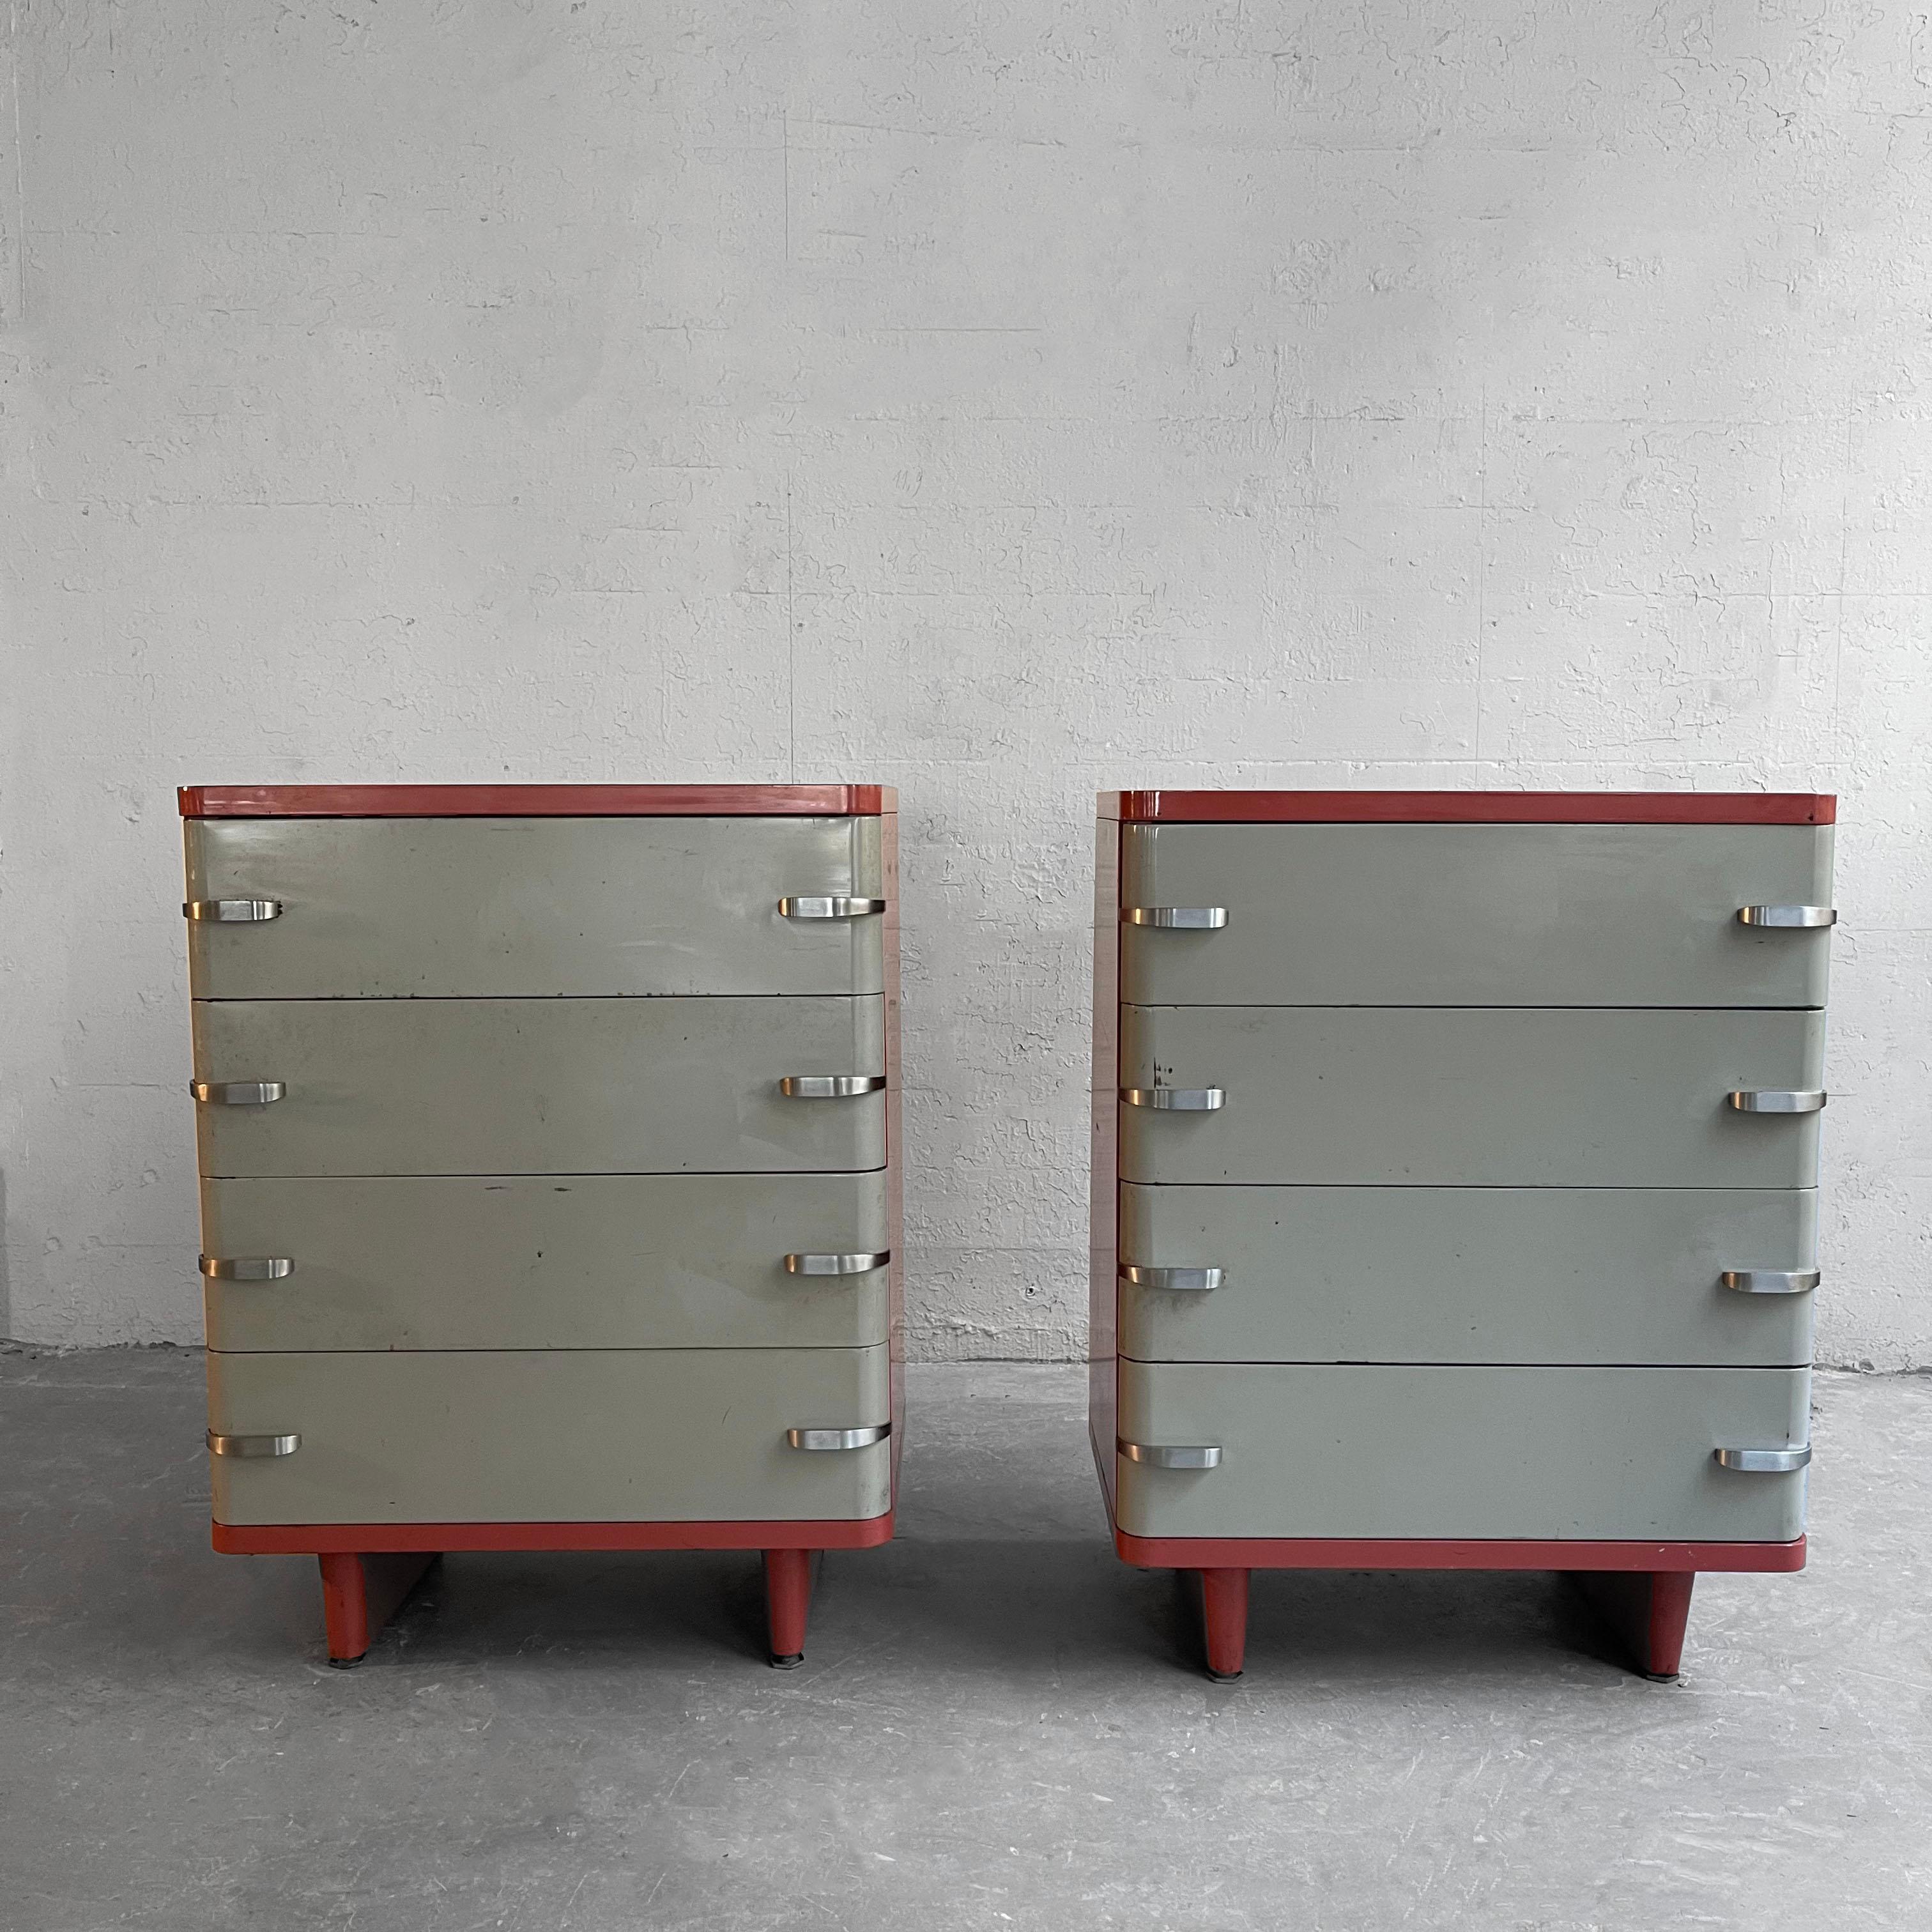 Streamlined, machine-age, painted steel, highboy dressers by Norman Bel Geddes for Royal Metal Manufacturing Co. with five generous drawers at 7.75 inches height feature the fabulous color combination of salmon pink surrounds and putty drawers with